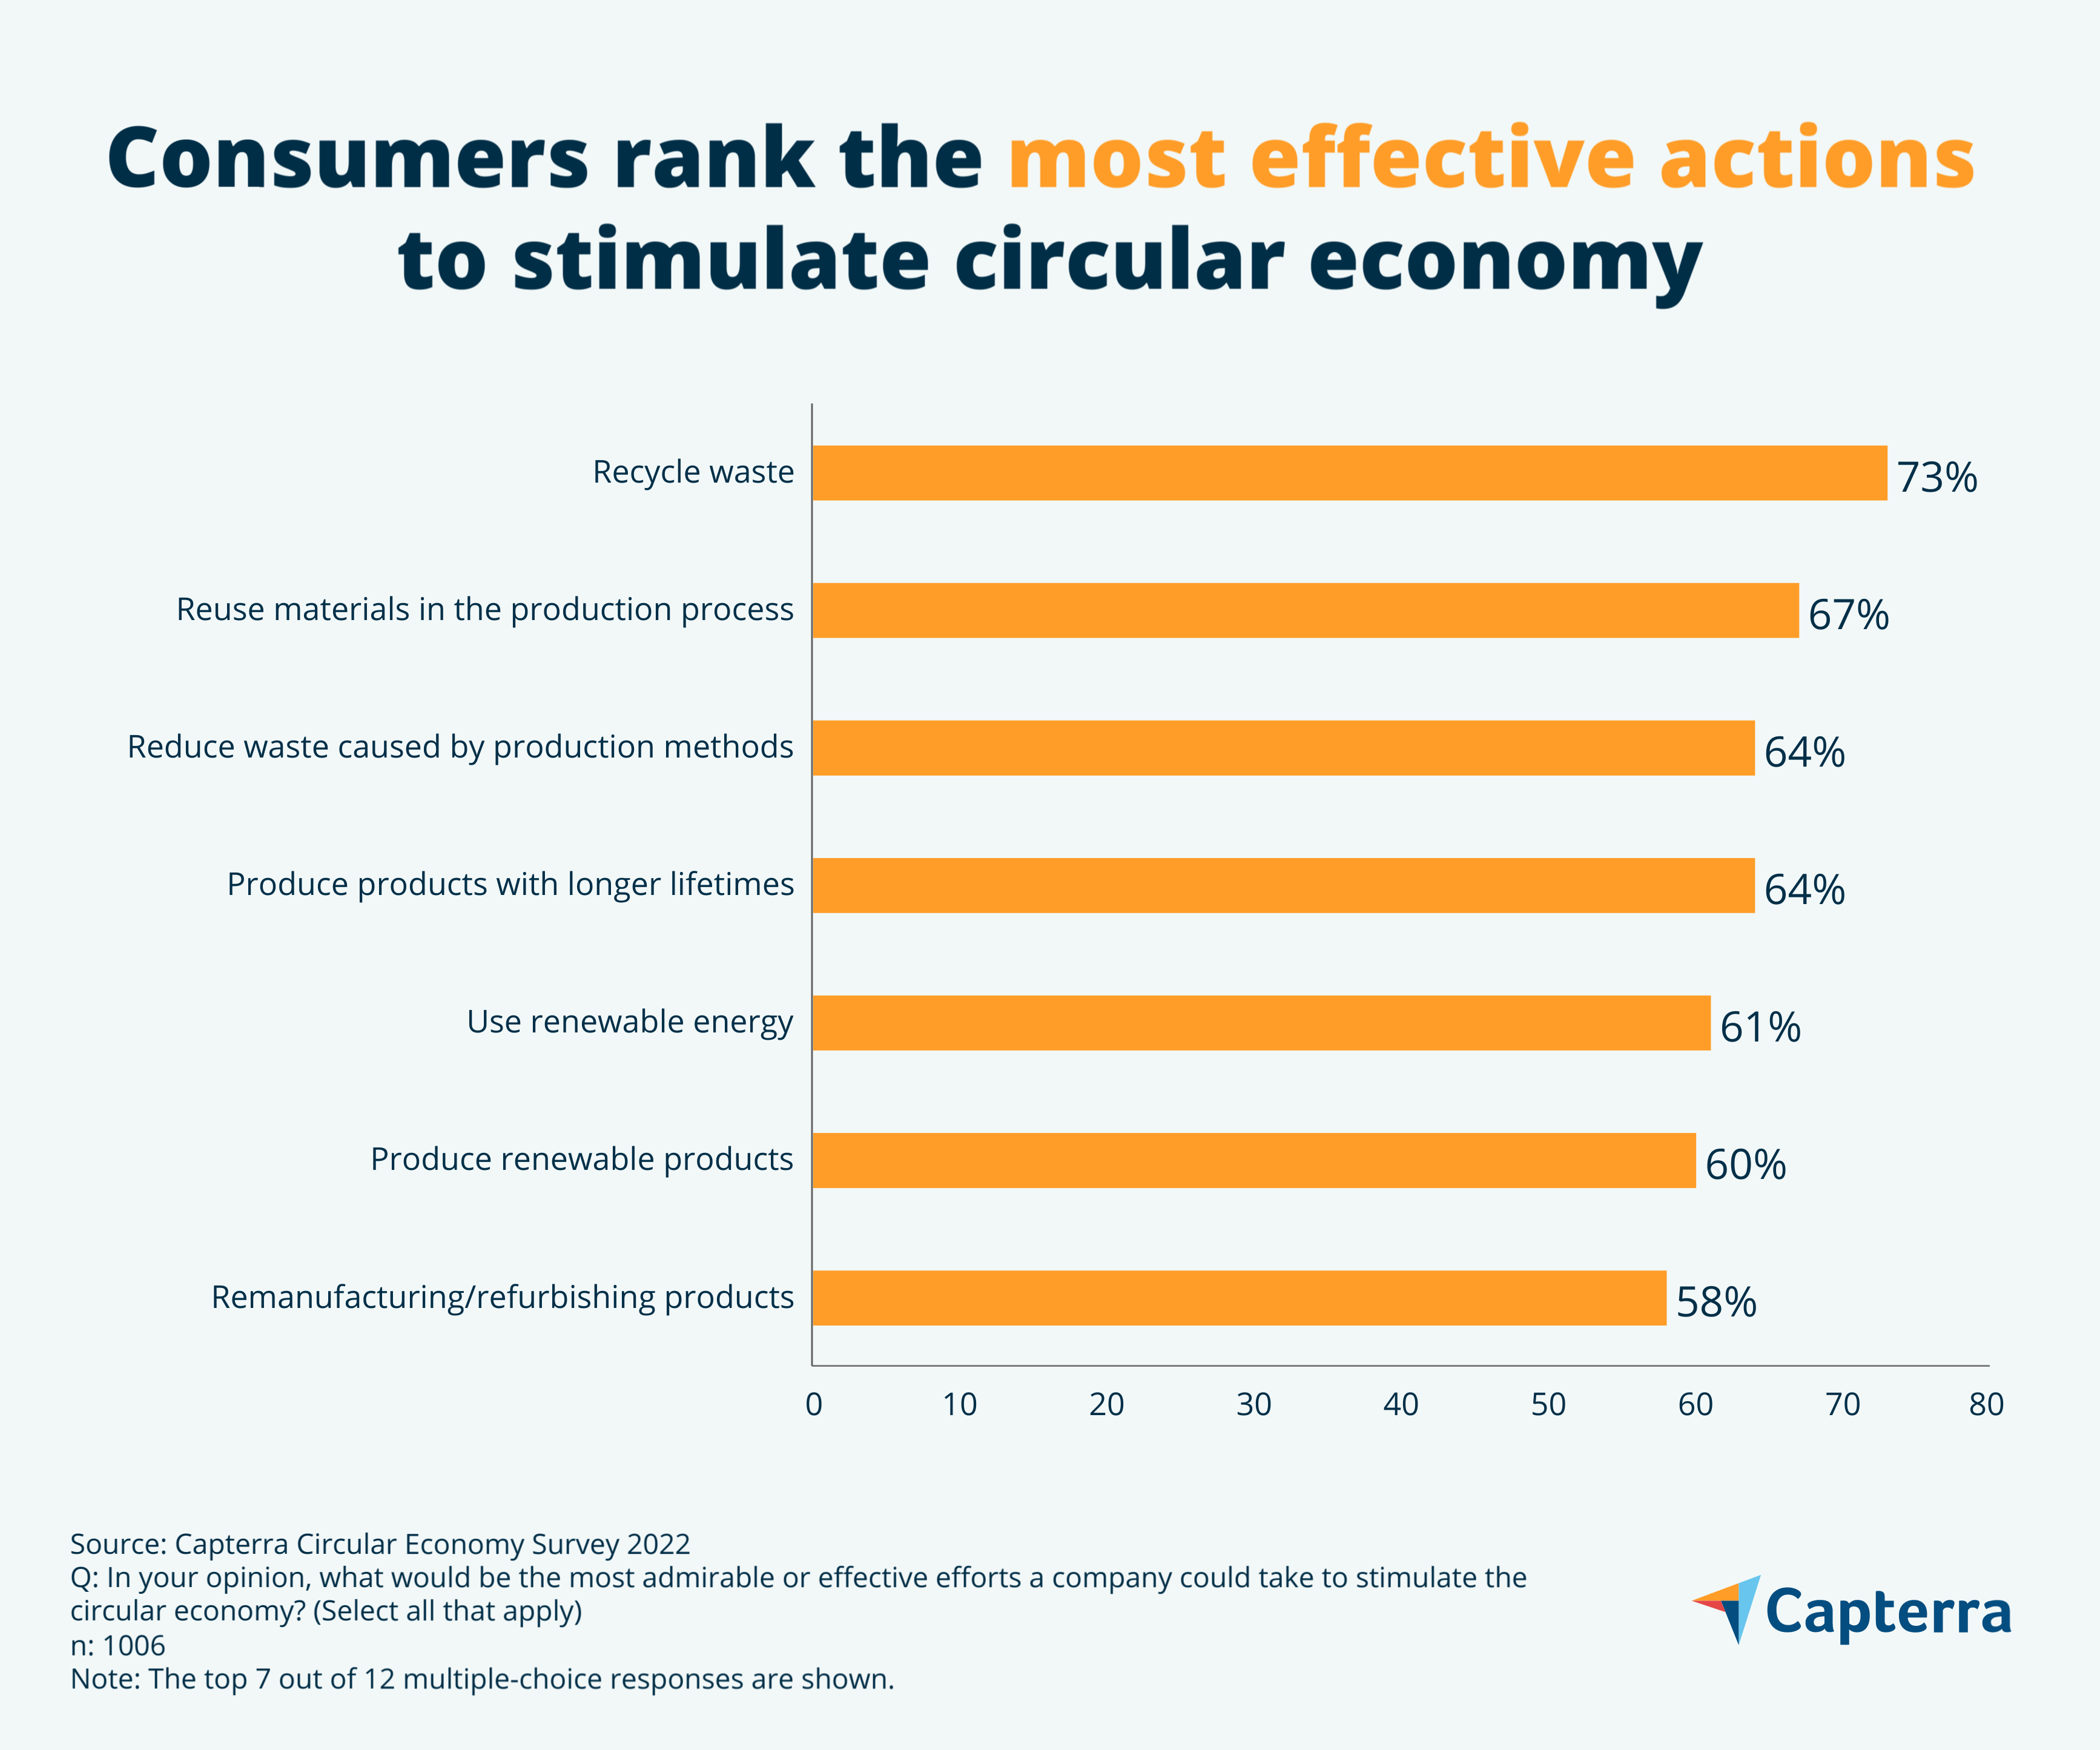 examples of circular economy activities for SMEs